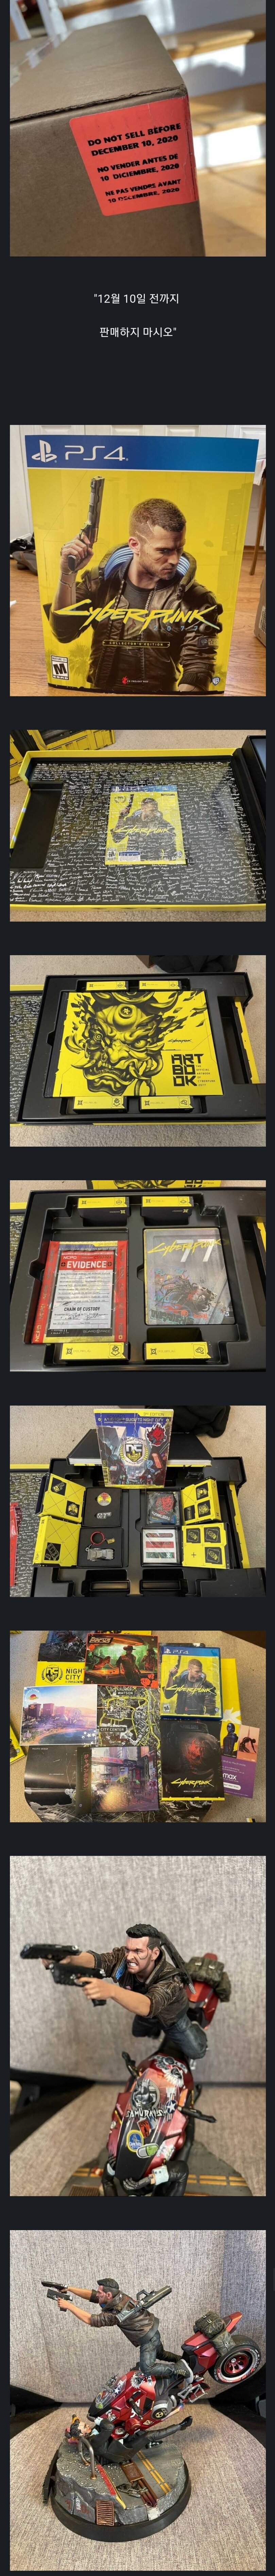 Cyberpunk2077 Collectors Edition Shipped by mistake